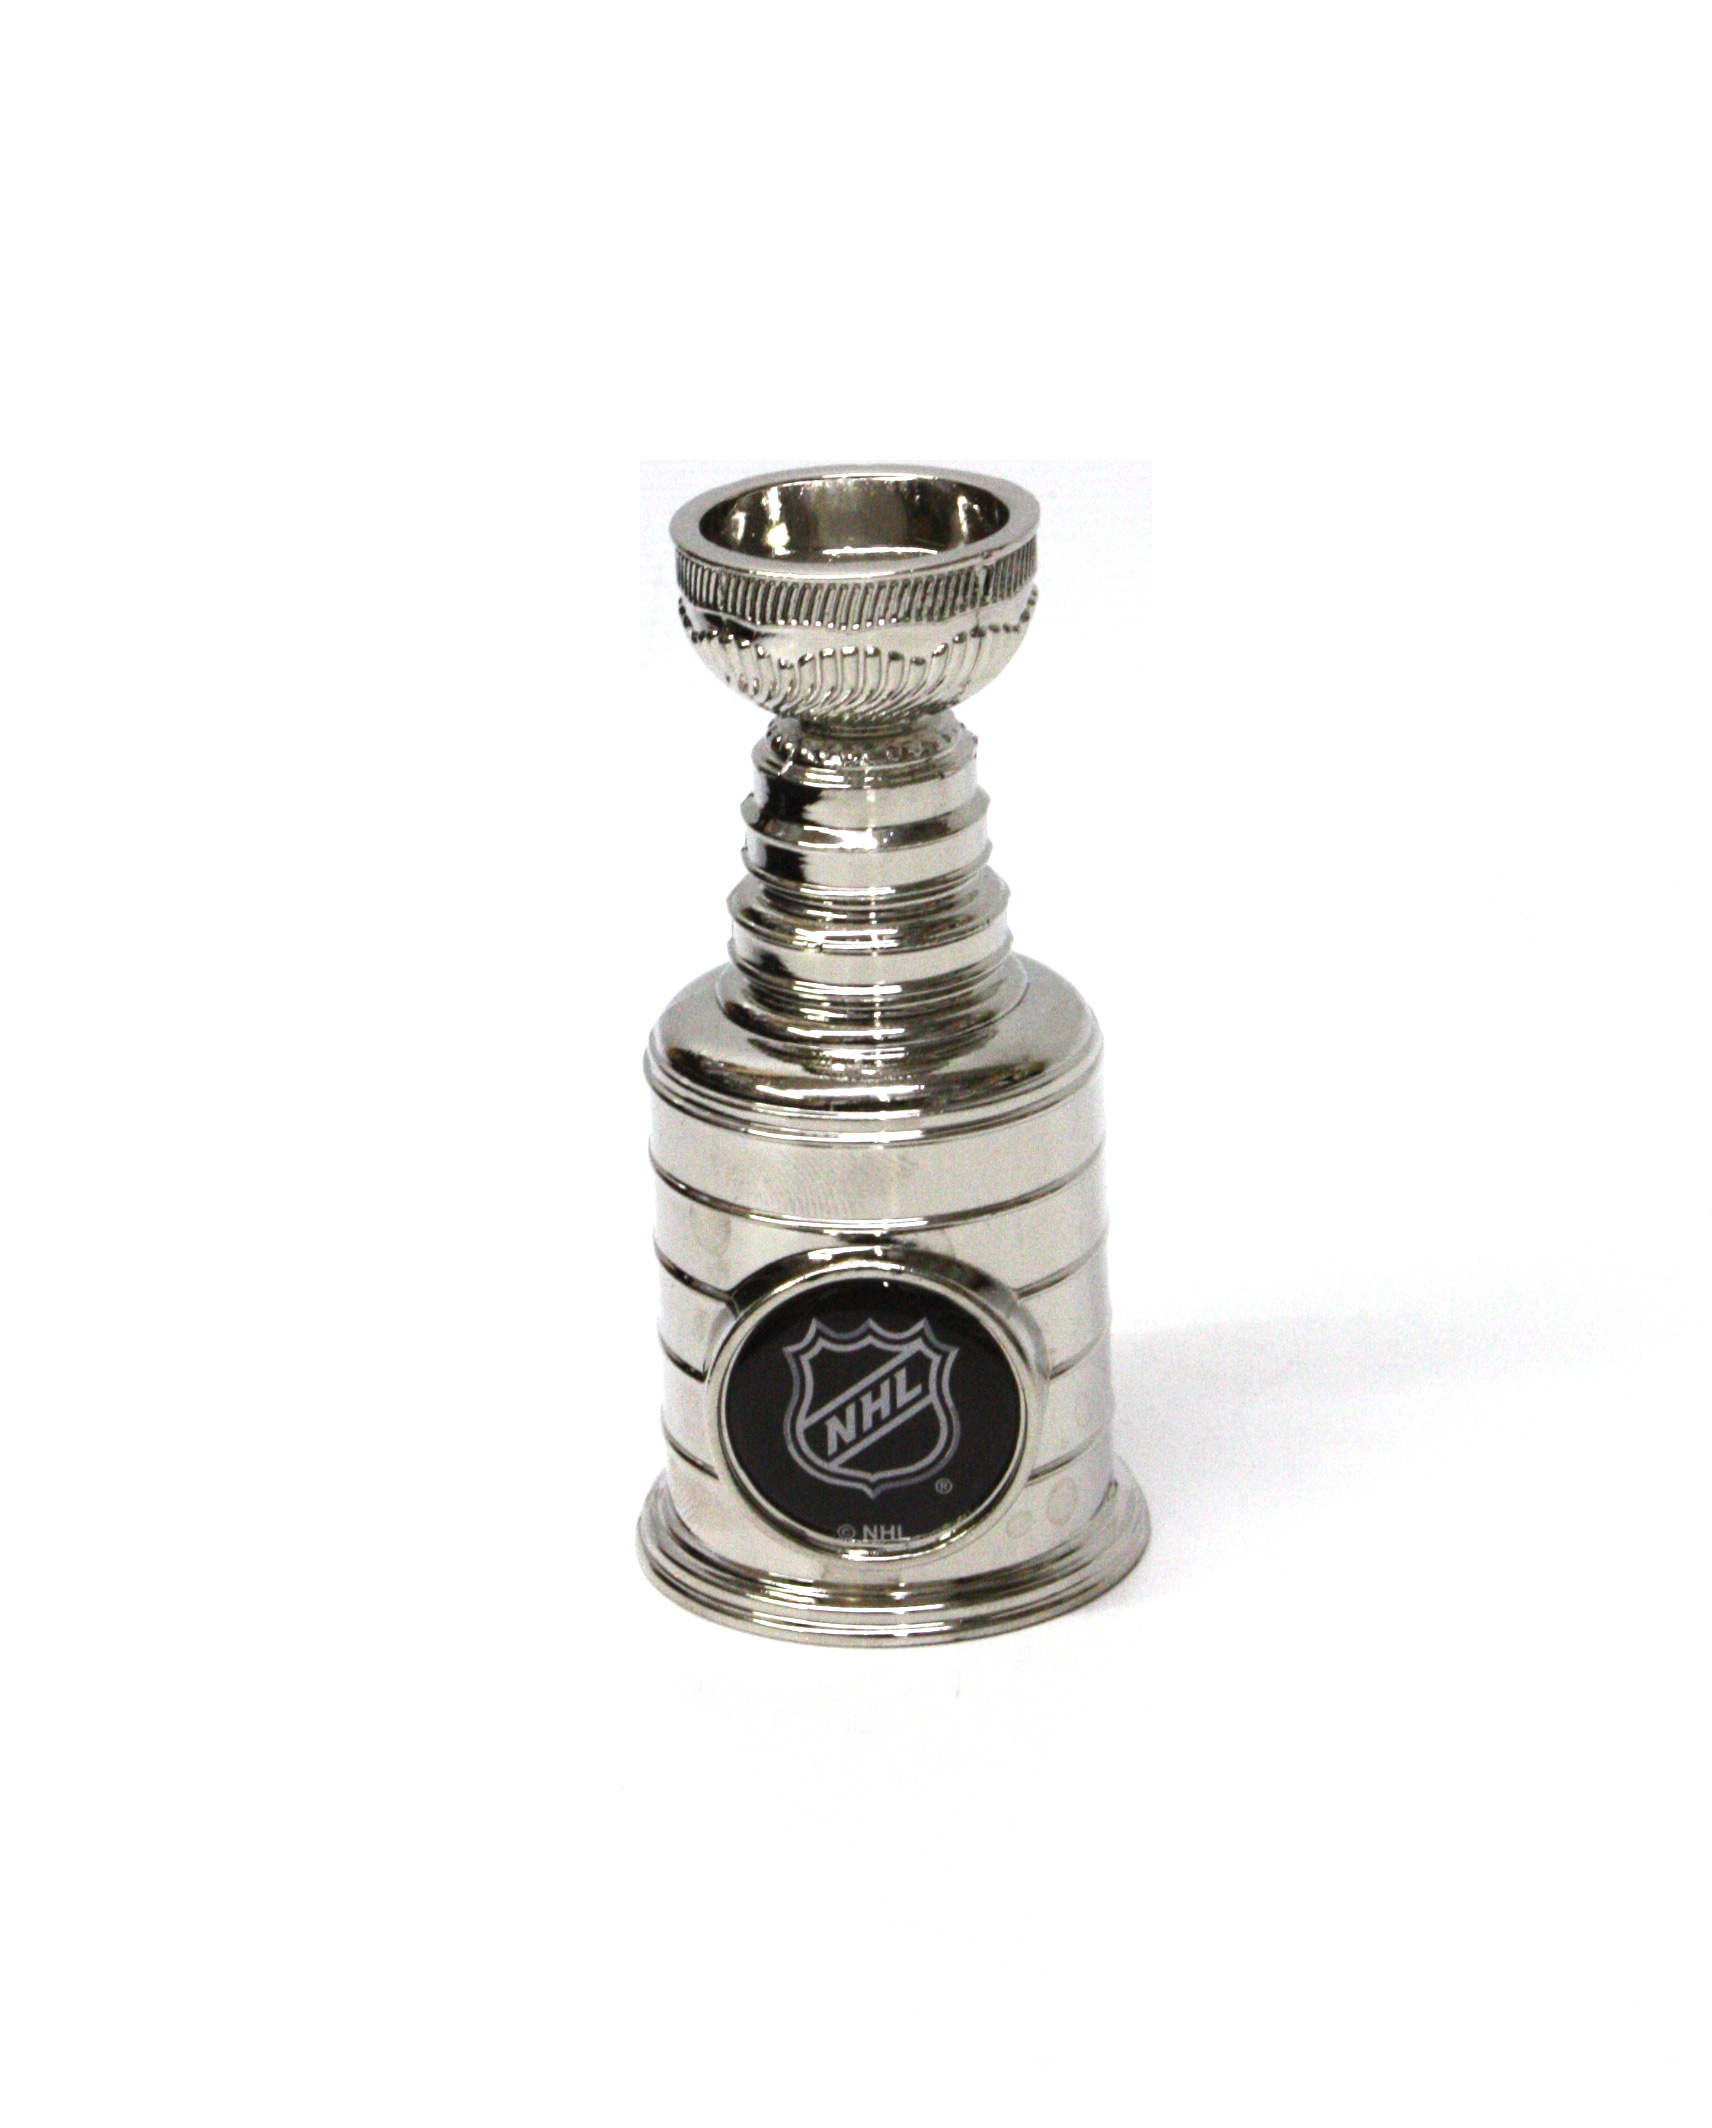 NHL Stanley Cup Replica, 8-in